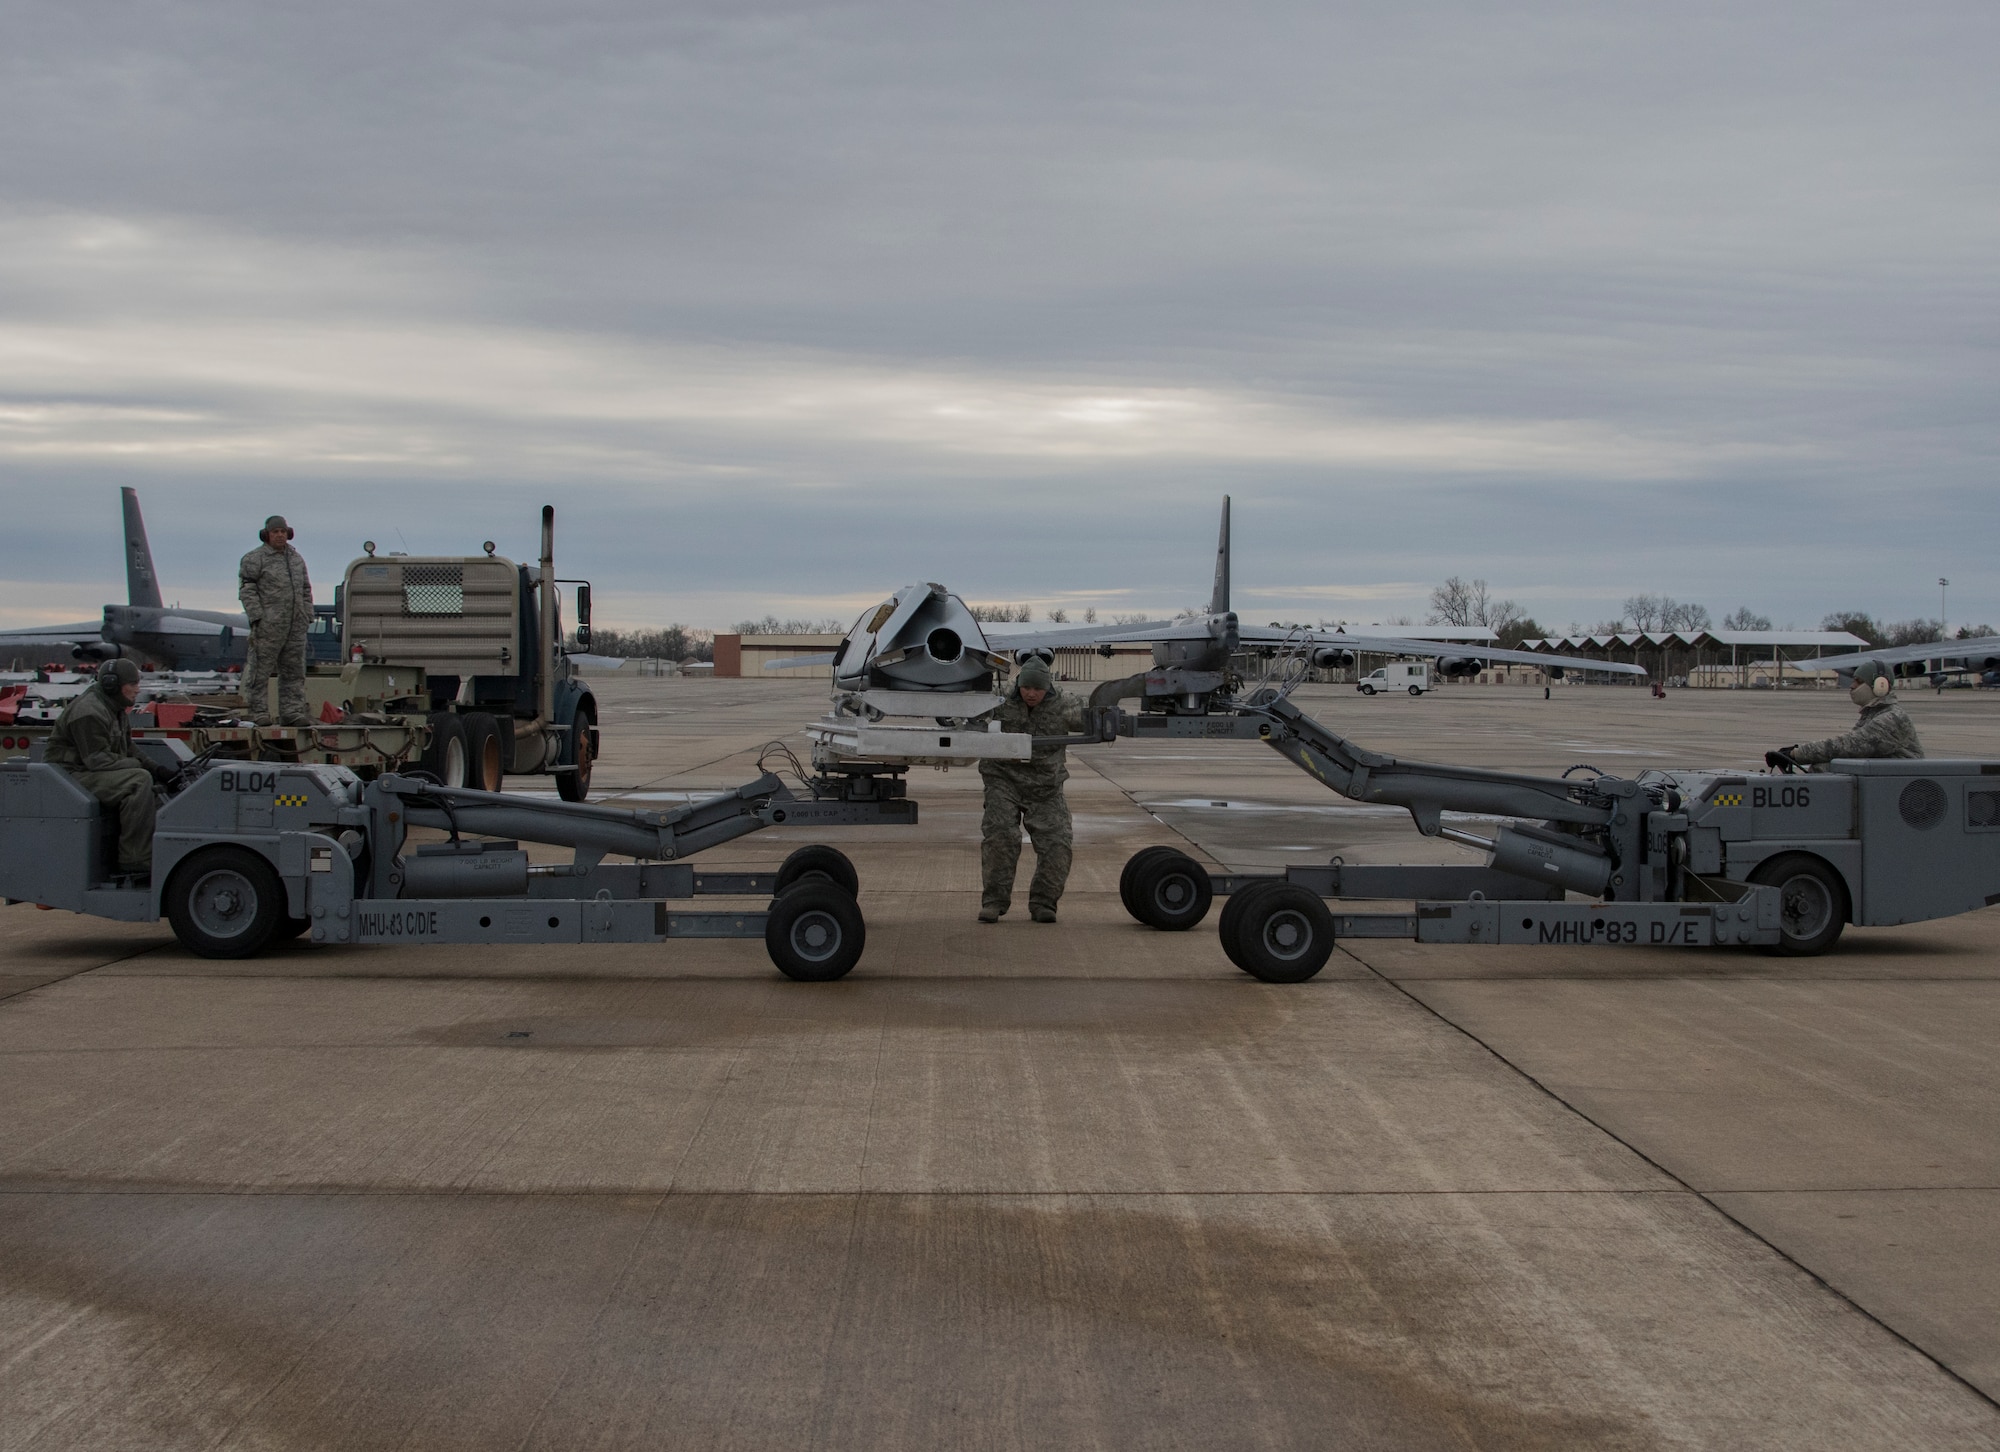 Aircraft armament systems specialists assigned to the 307th Aircraft Maintenance Squadron prepares to load an AGM-158 Joint Air-to-Surface Standoff Missile onto a trailer at Barksdale Air Force Base, Louisiana, February 9, 2019. The JASSM’s were part of a test of the Conventional Rotary Launcher, a weapons platform on the B-52 Stratofortress.  The test was designed to see if the CRL could provide power to eight JASSM’s at once.  (U.S. Air Force photo by Airman 1st Class Maxwell Daigle)